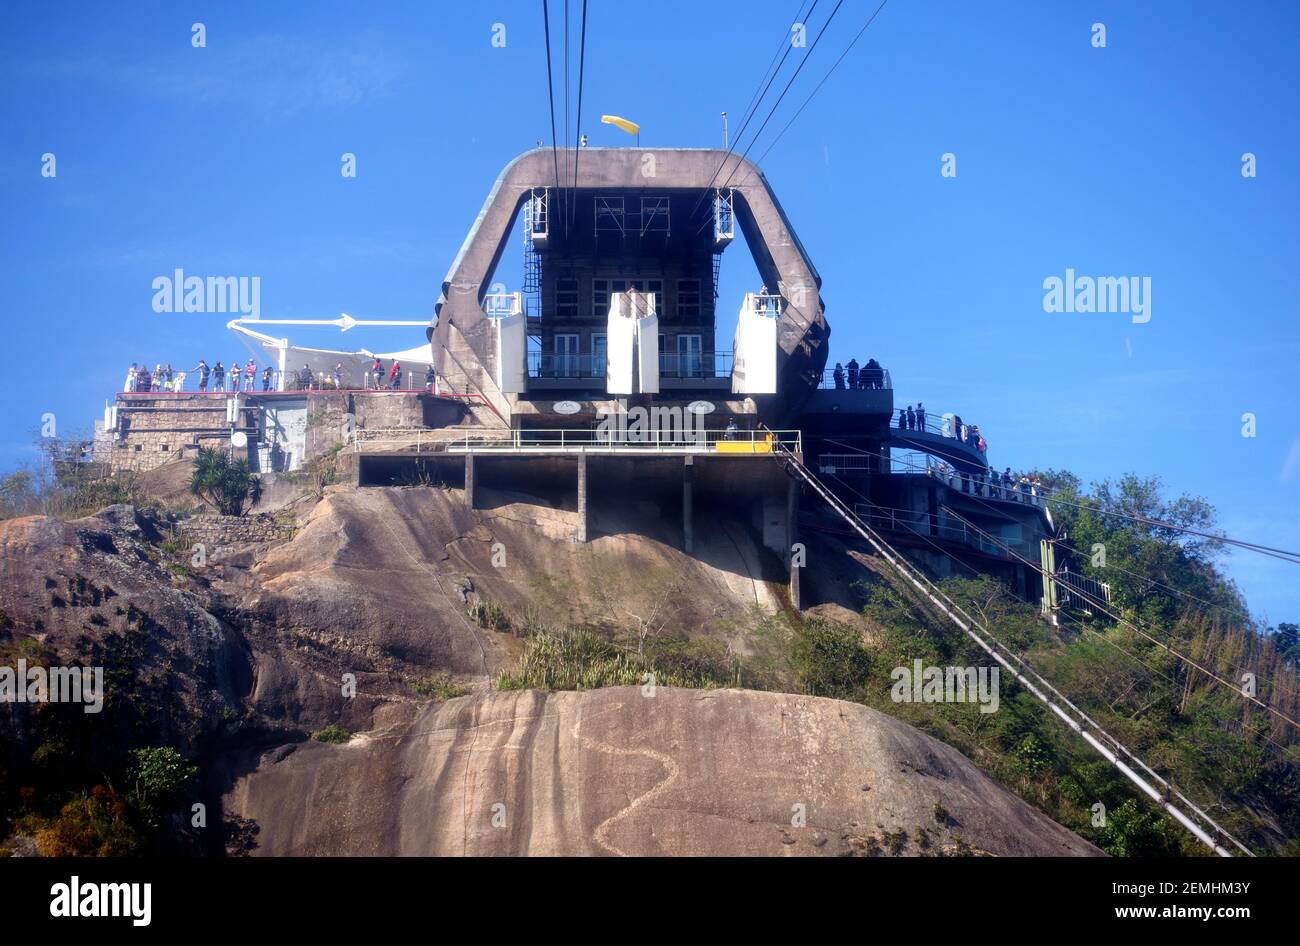 Approaching the top cableway station on Sugarloaf Mountain in Rio de Janeiro, Brazil Stock Photo